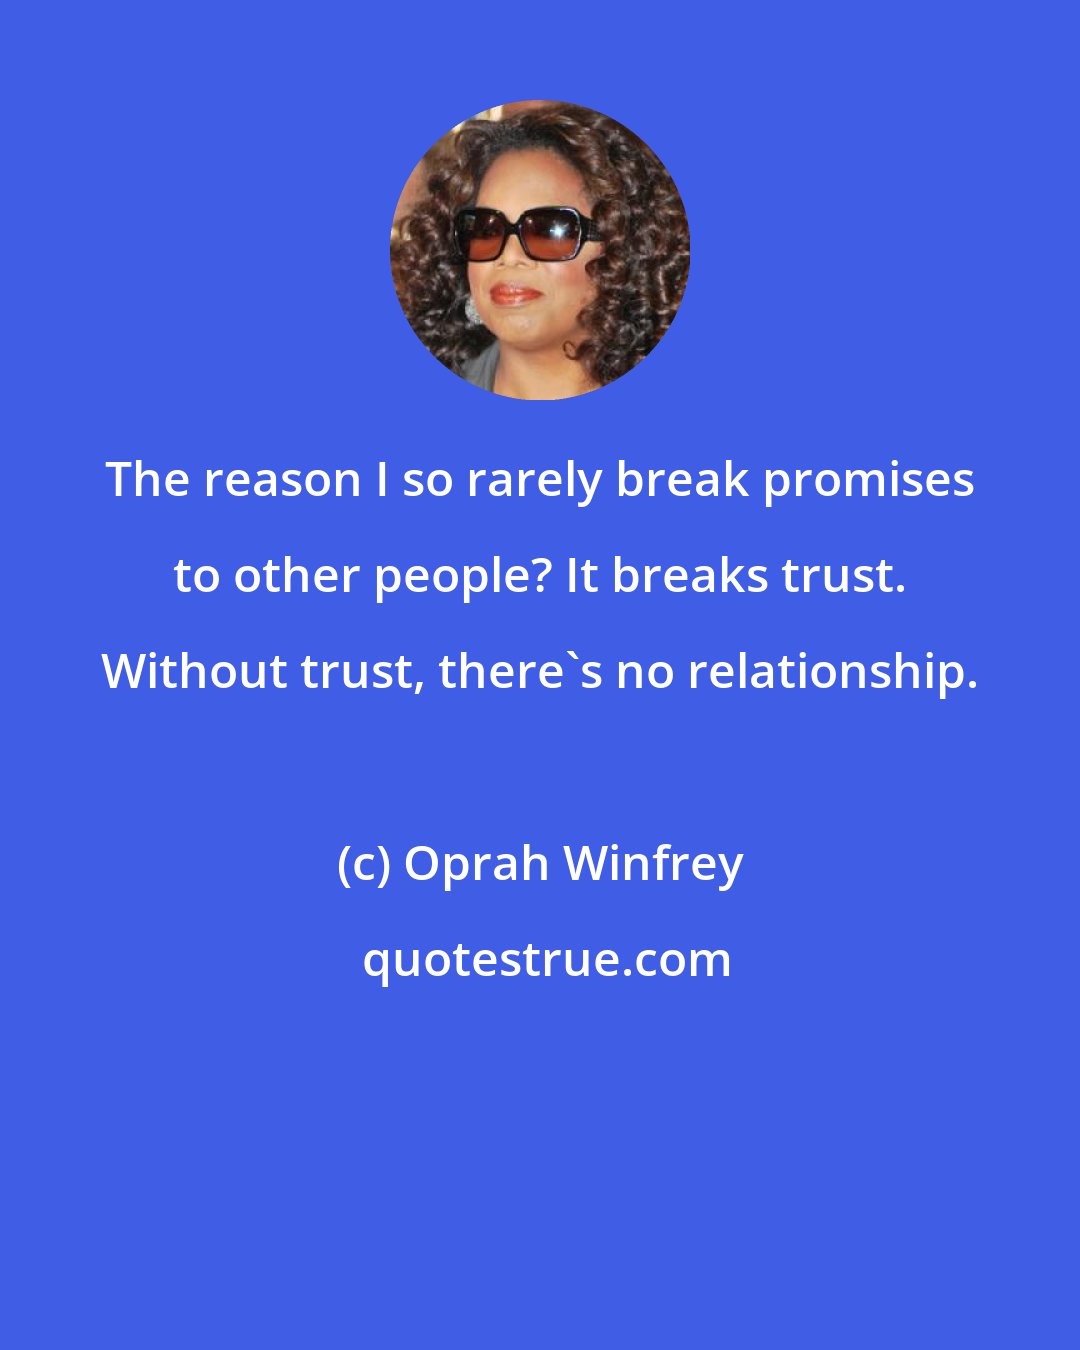 Oprah Winfrey: The reason I so rarely break promises to other people? It breaks trust. Without trust, there's no relationship.